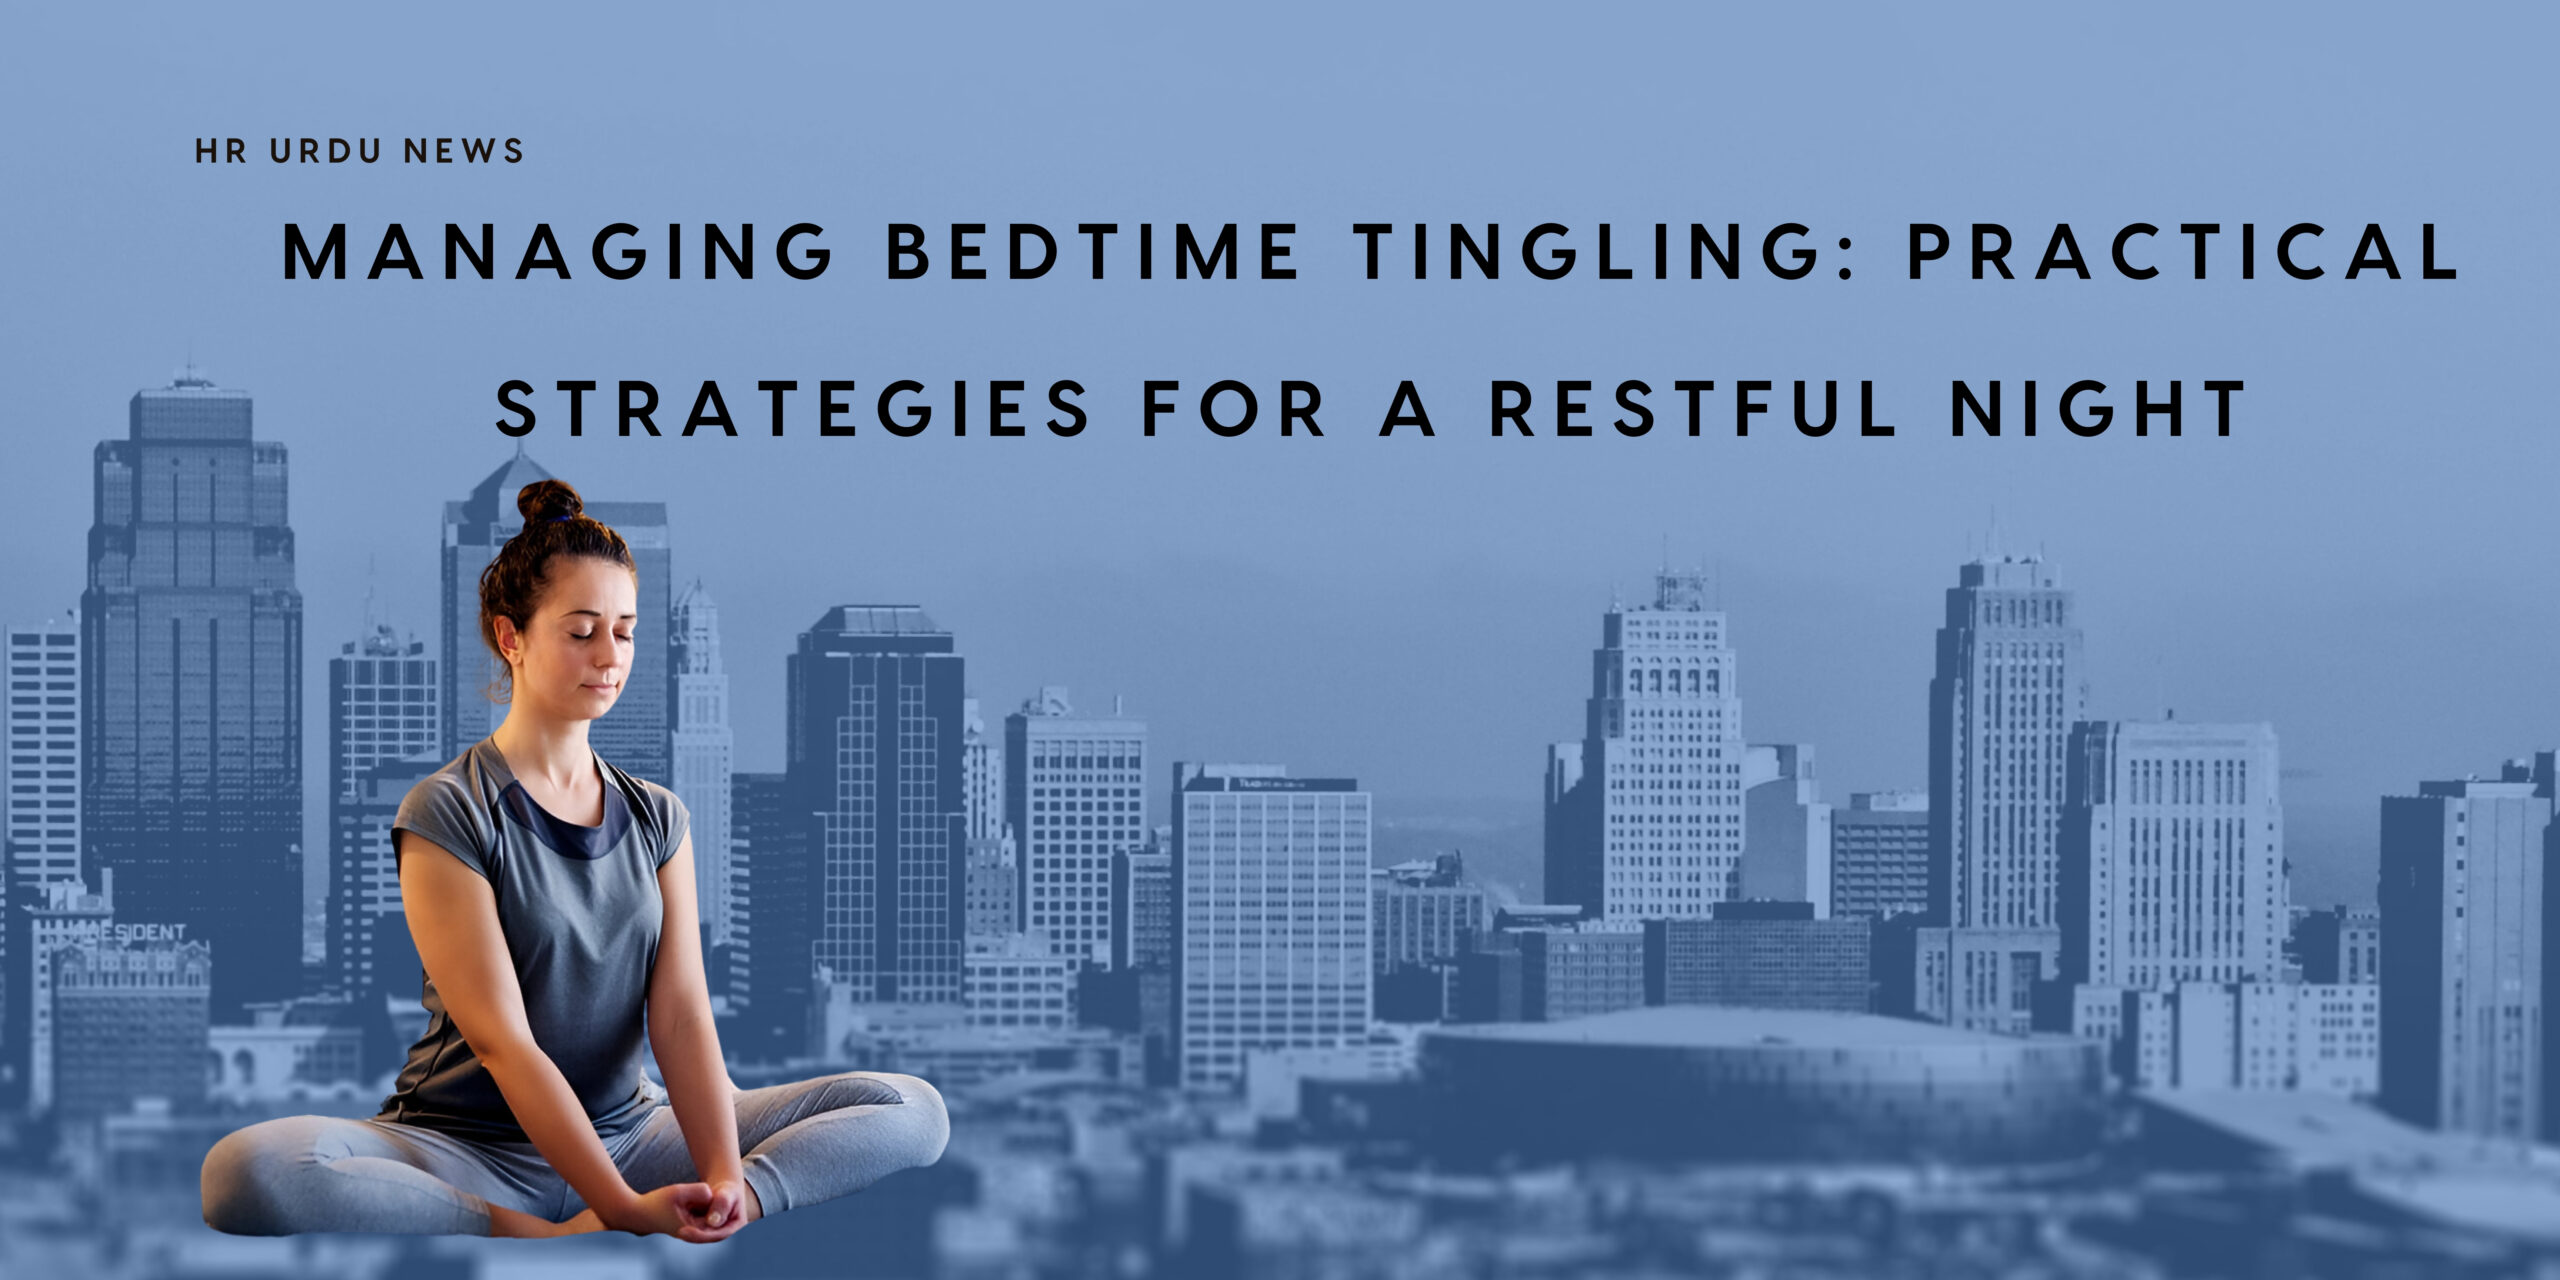 Managing Bedtime Tingling: Practical Strategies for a Restful Night